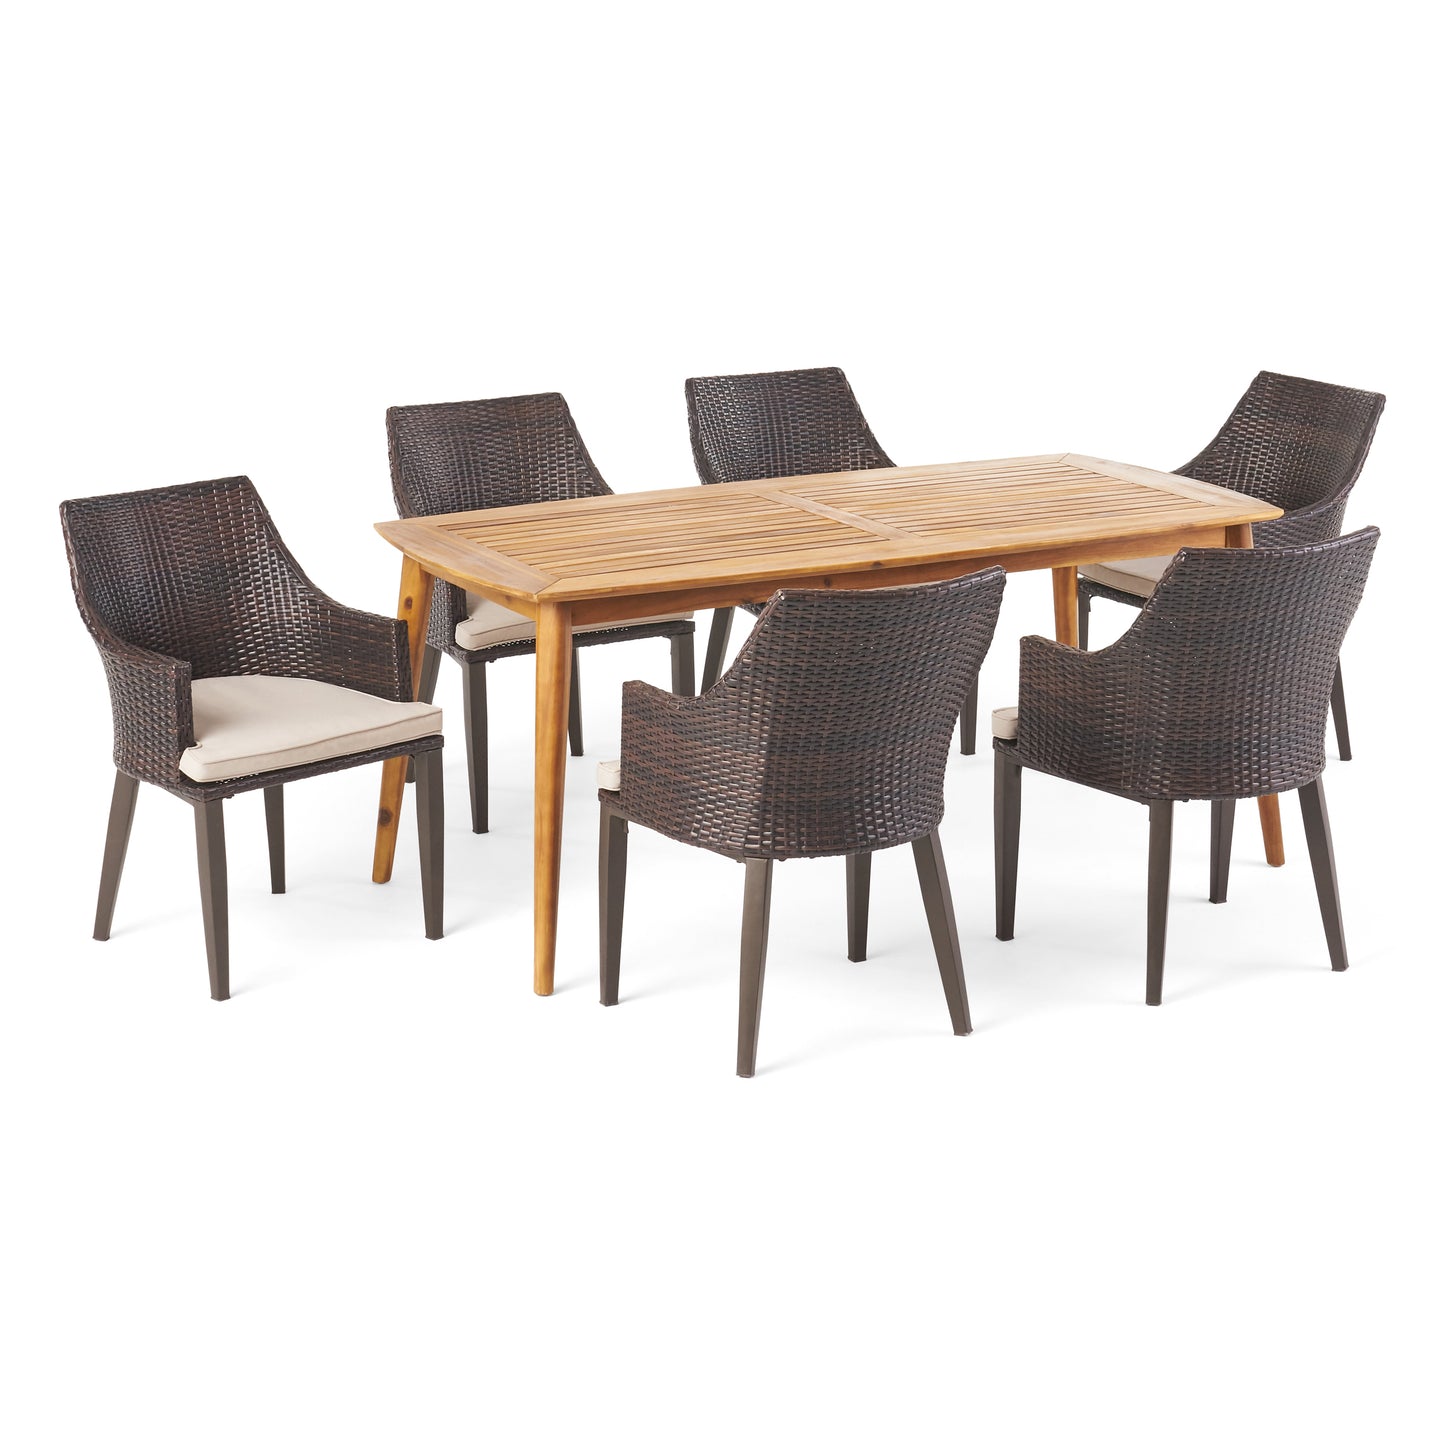 Allentown Outdoor 7 Piece Multi-brown Wicker Dining Set with Acacia Wood Table